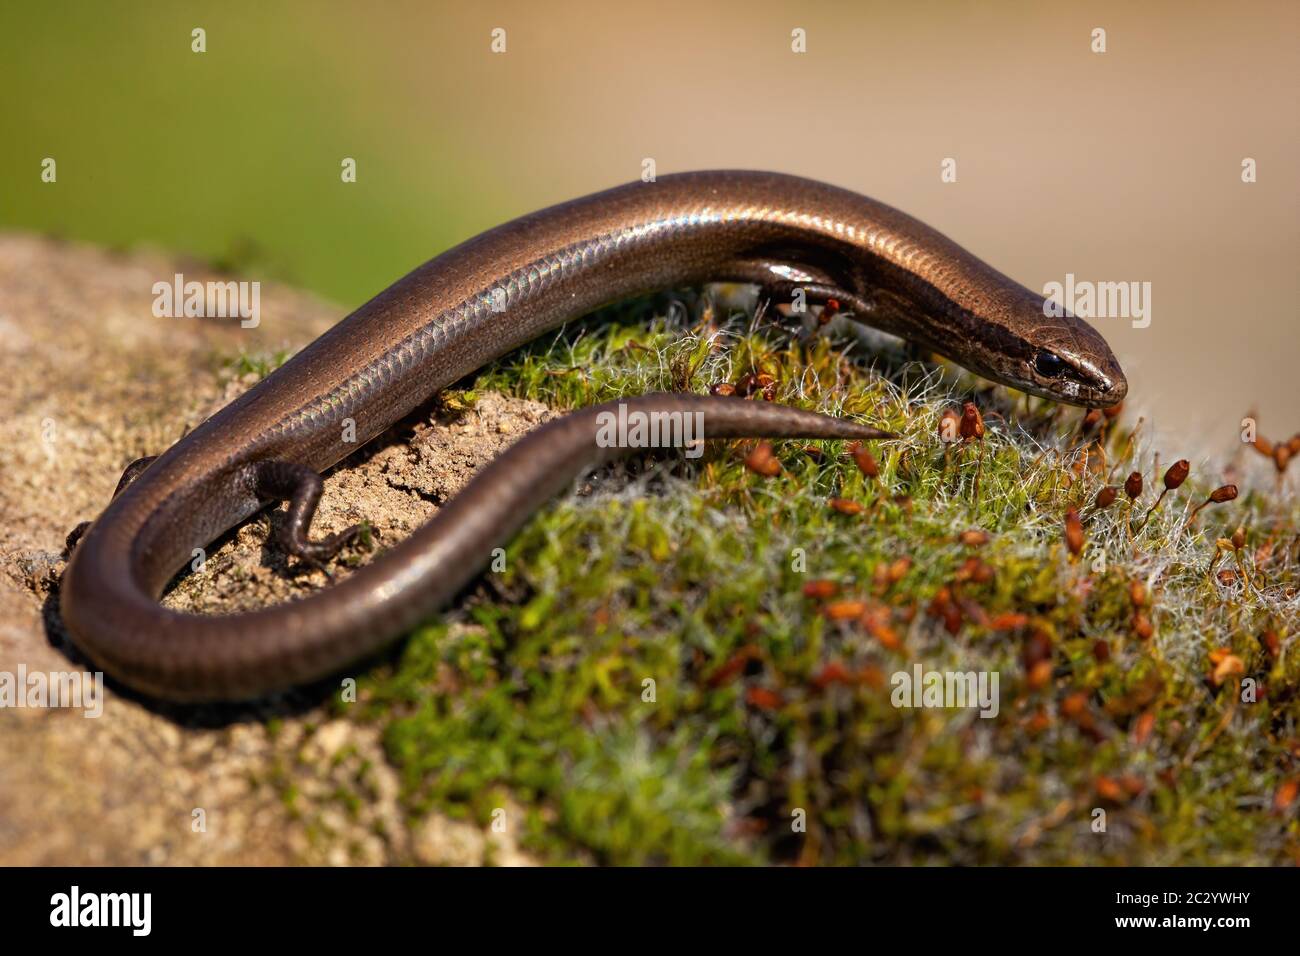 European copper skink, ablepharus kitaibelii, on a green moss in summer nature. Small endemic species of a brown lizard with legs crawling on a tree t Stock Photo